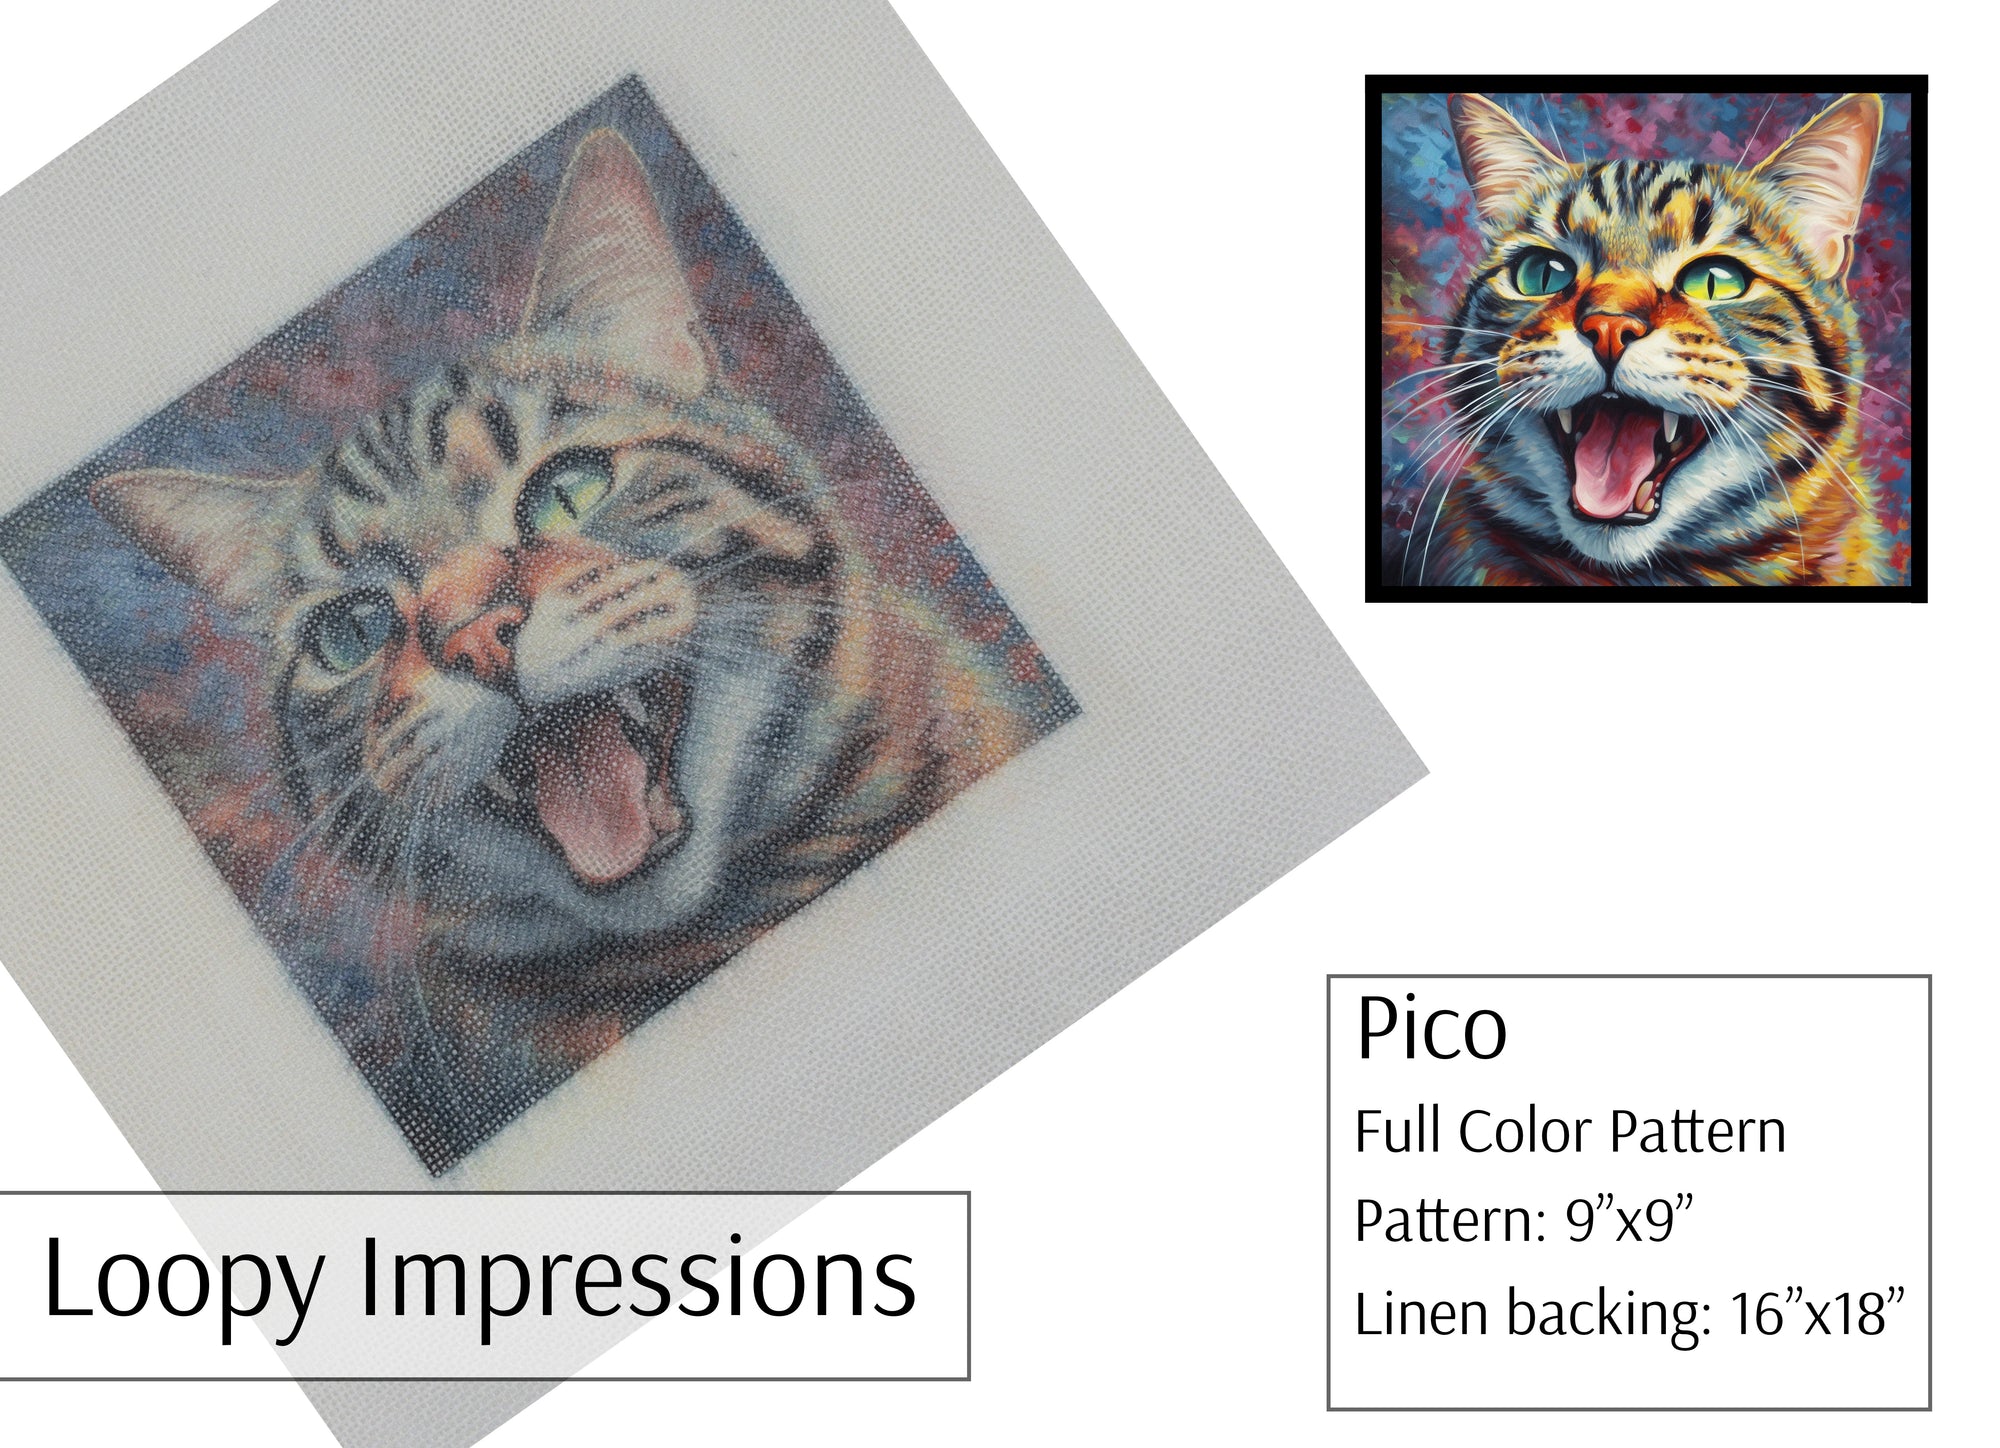 Loopy Impressions Full Color Pattern - Pico